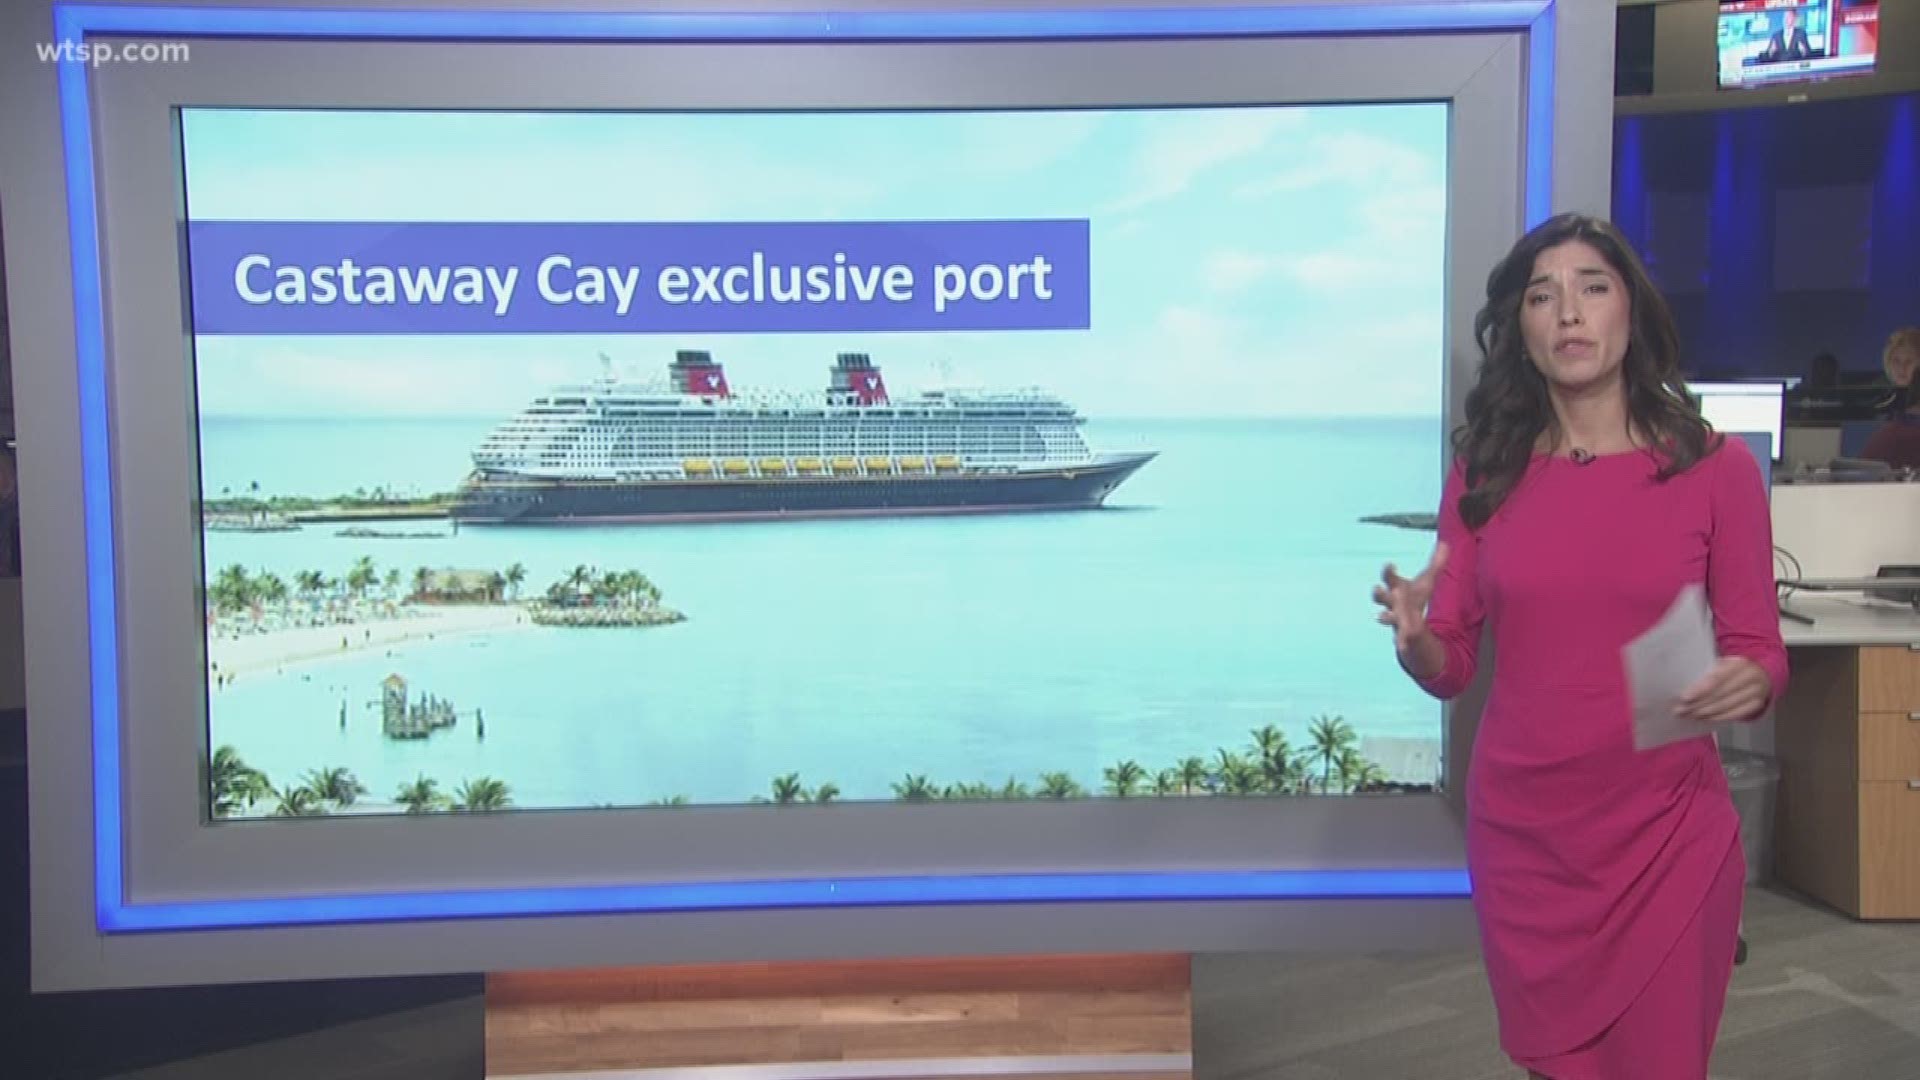 Disney cruise ship is delaying visit to Castaway Cay Island and it's been changed to a two-day cruise due to Hurricane Dorian. Refunds and credits will be offered.